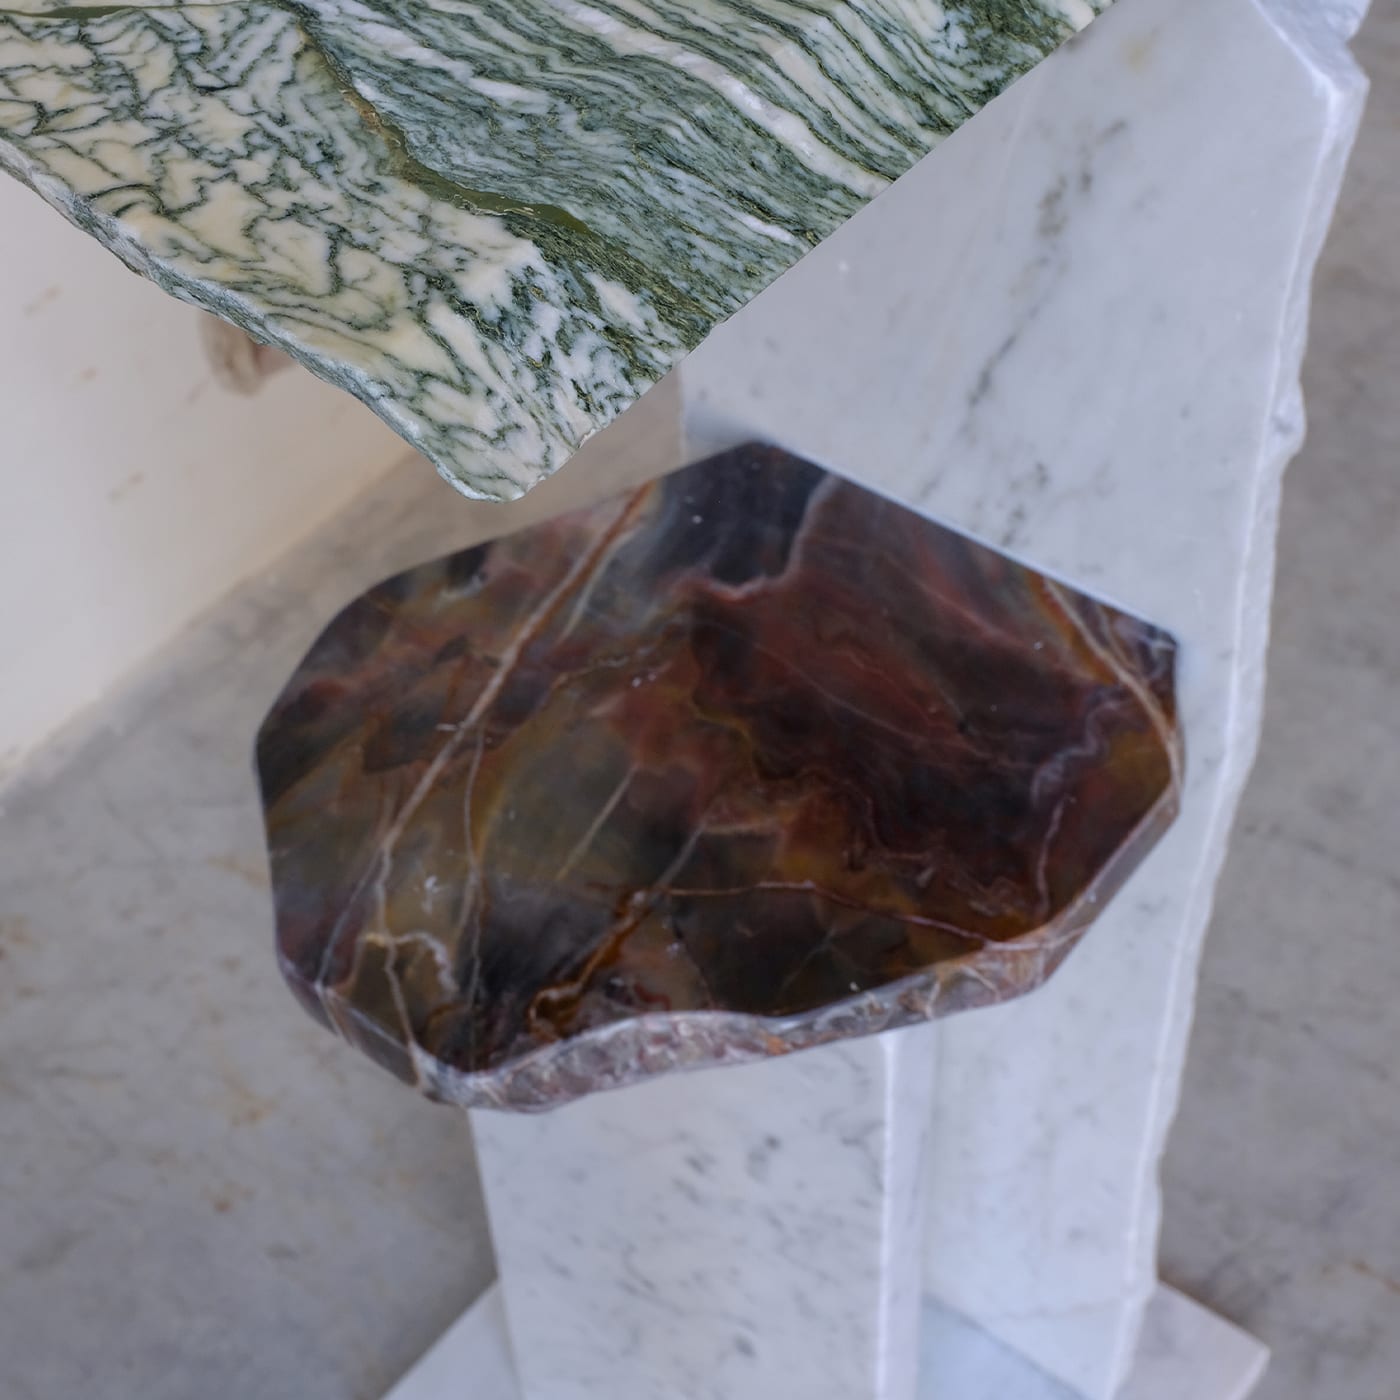 Carrara marble Tall Side Table - Stone Stackers